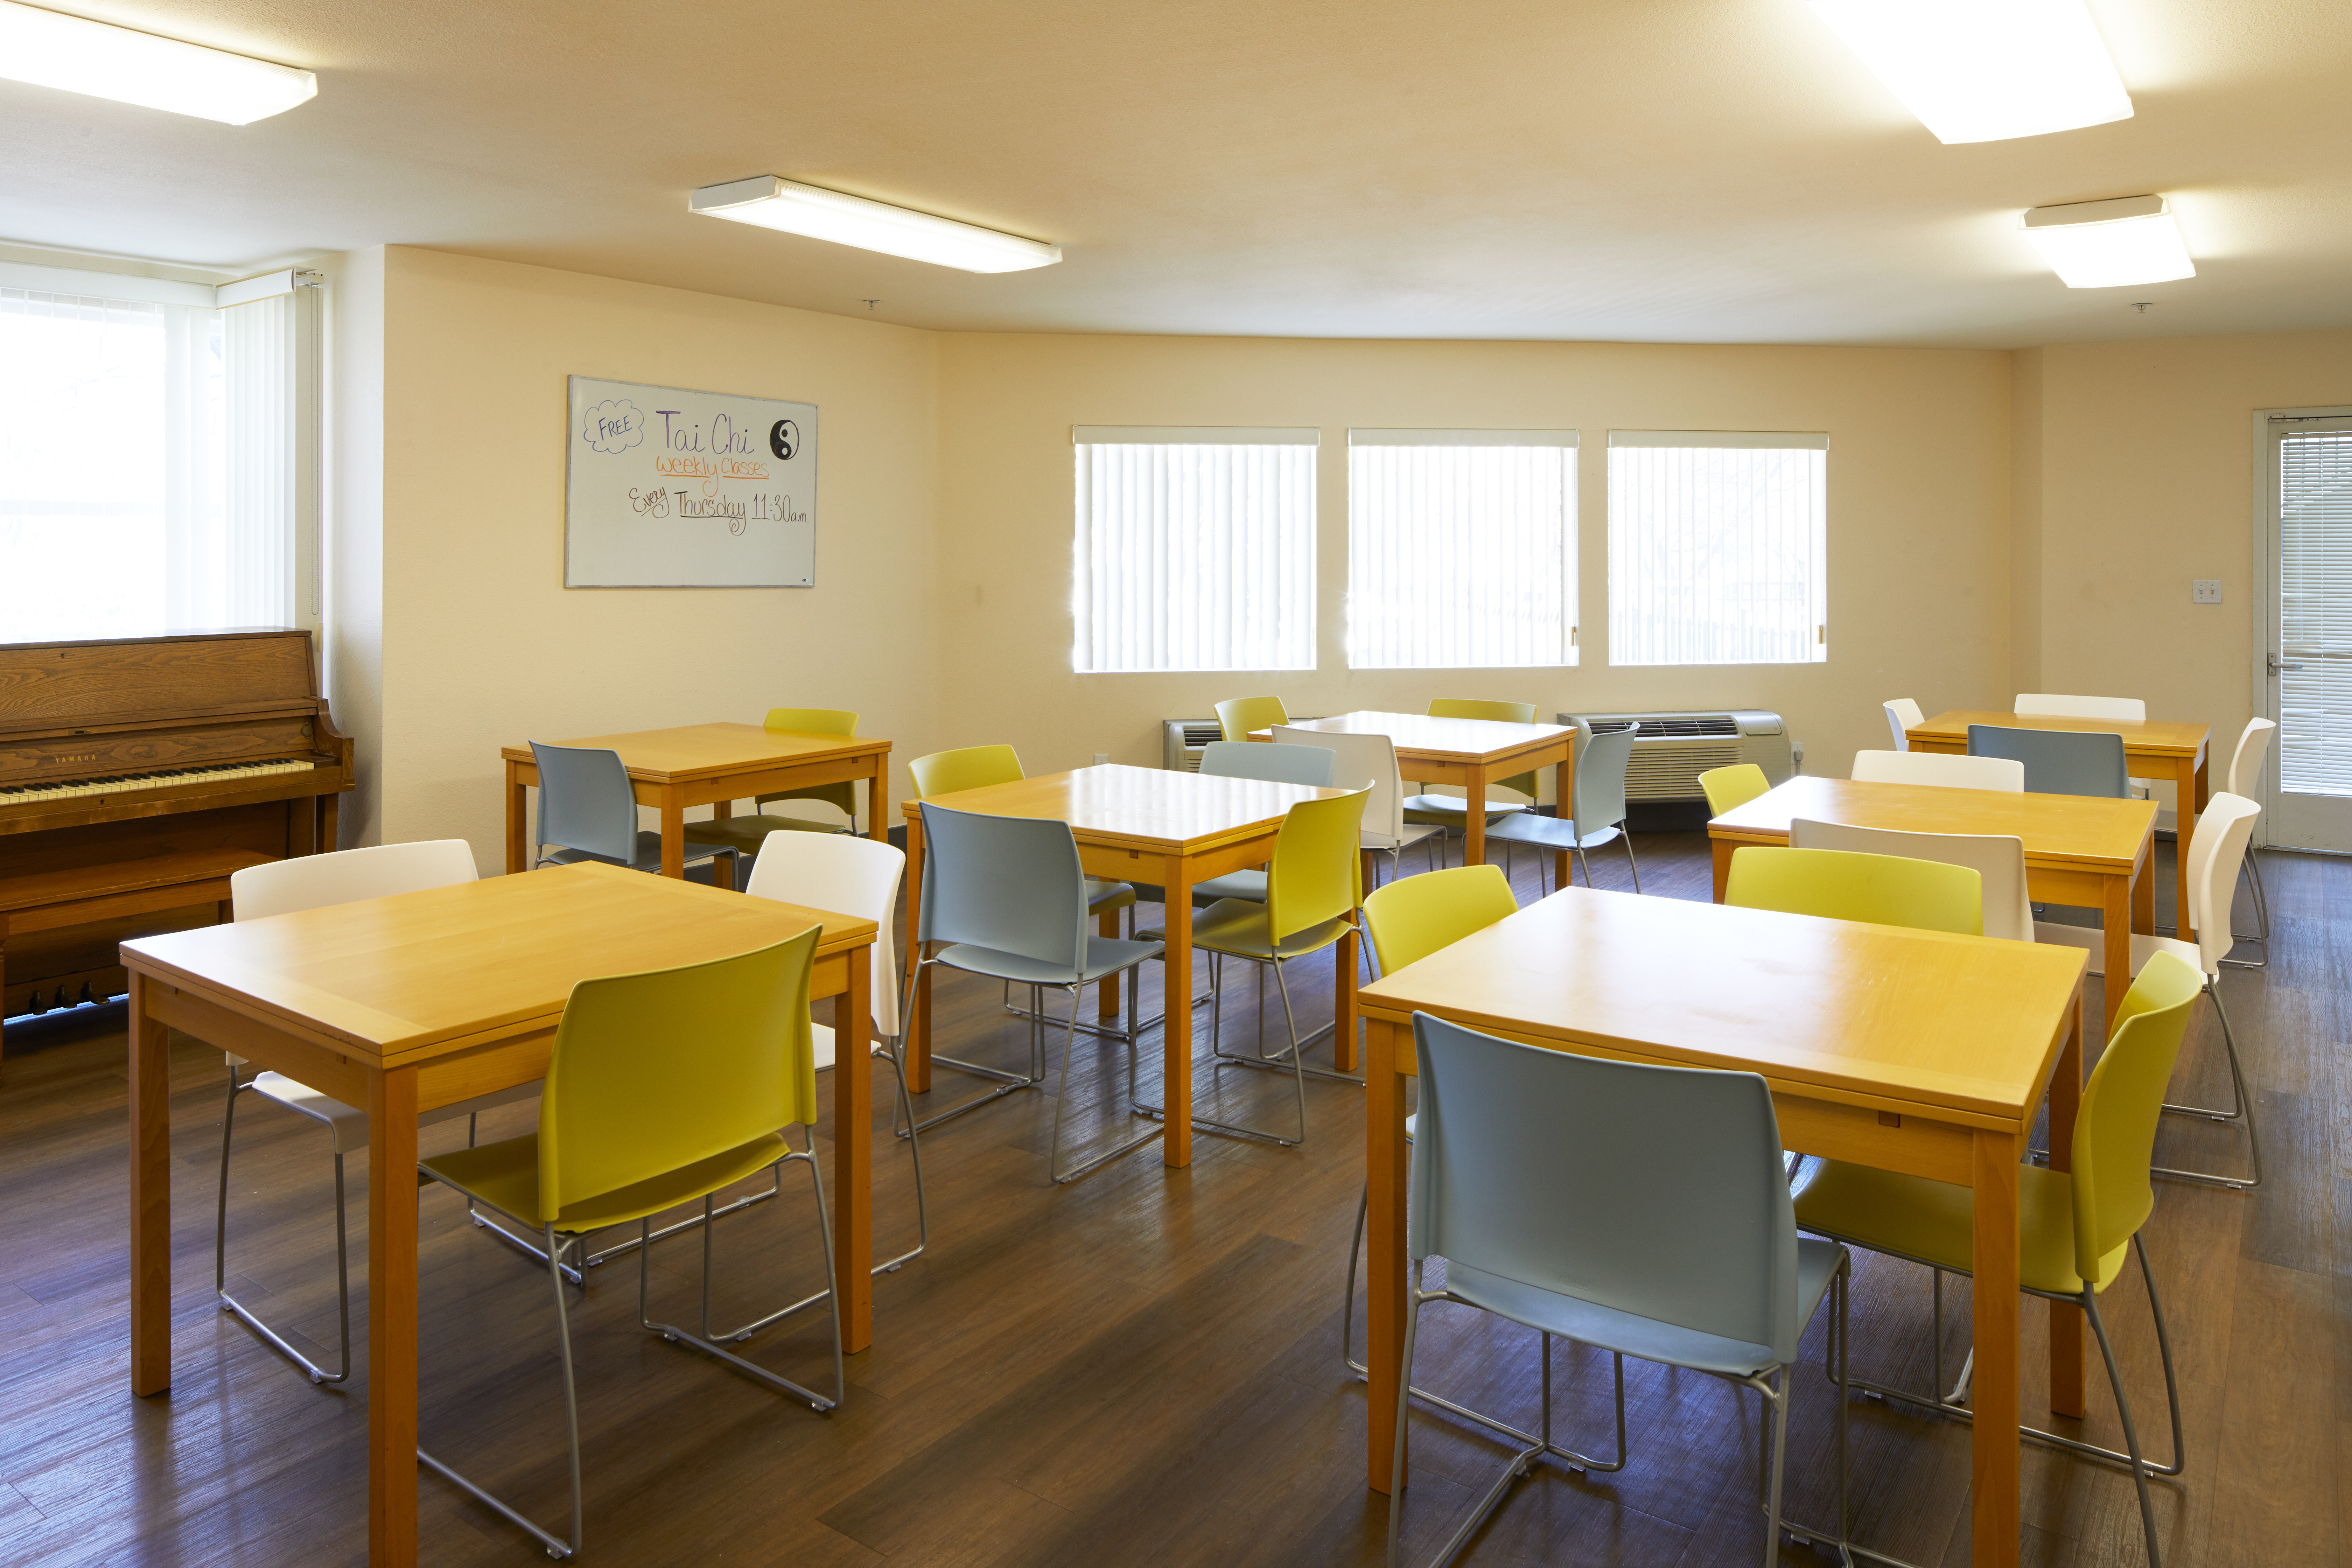 Image of the common room equipped with tables and chairs